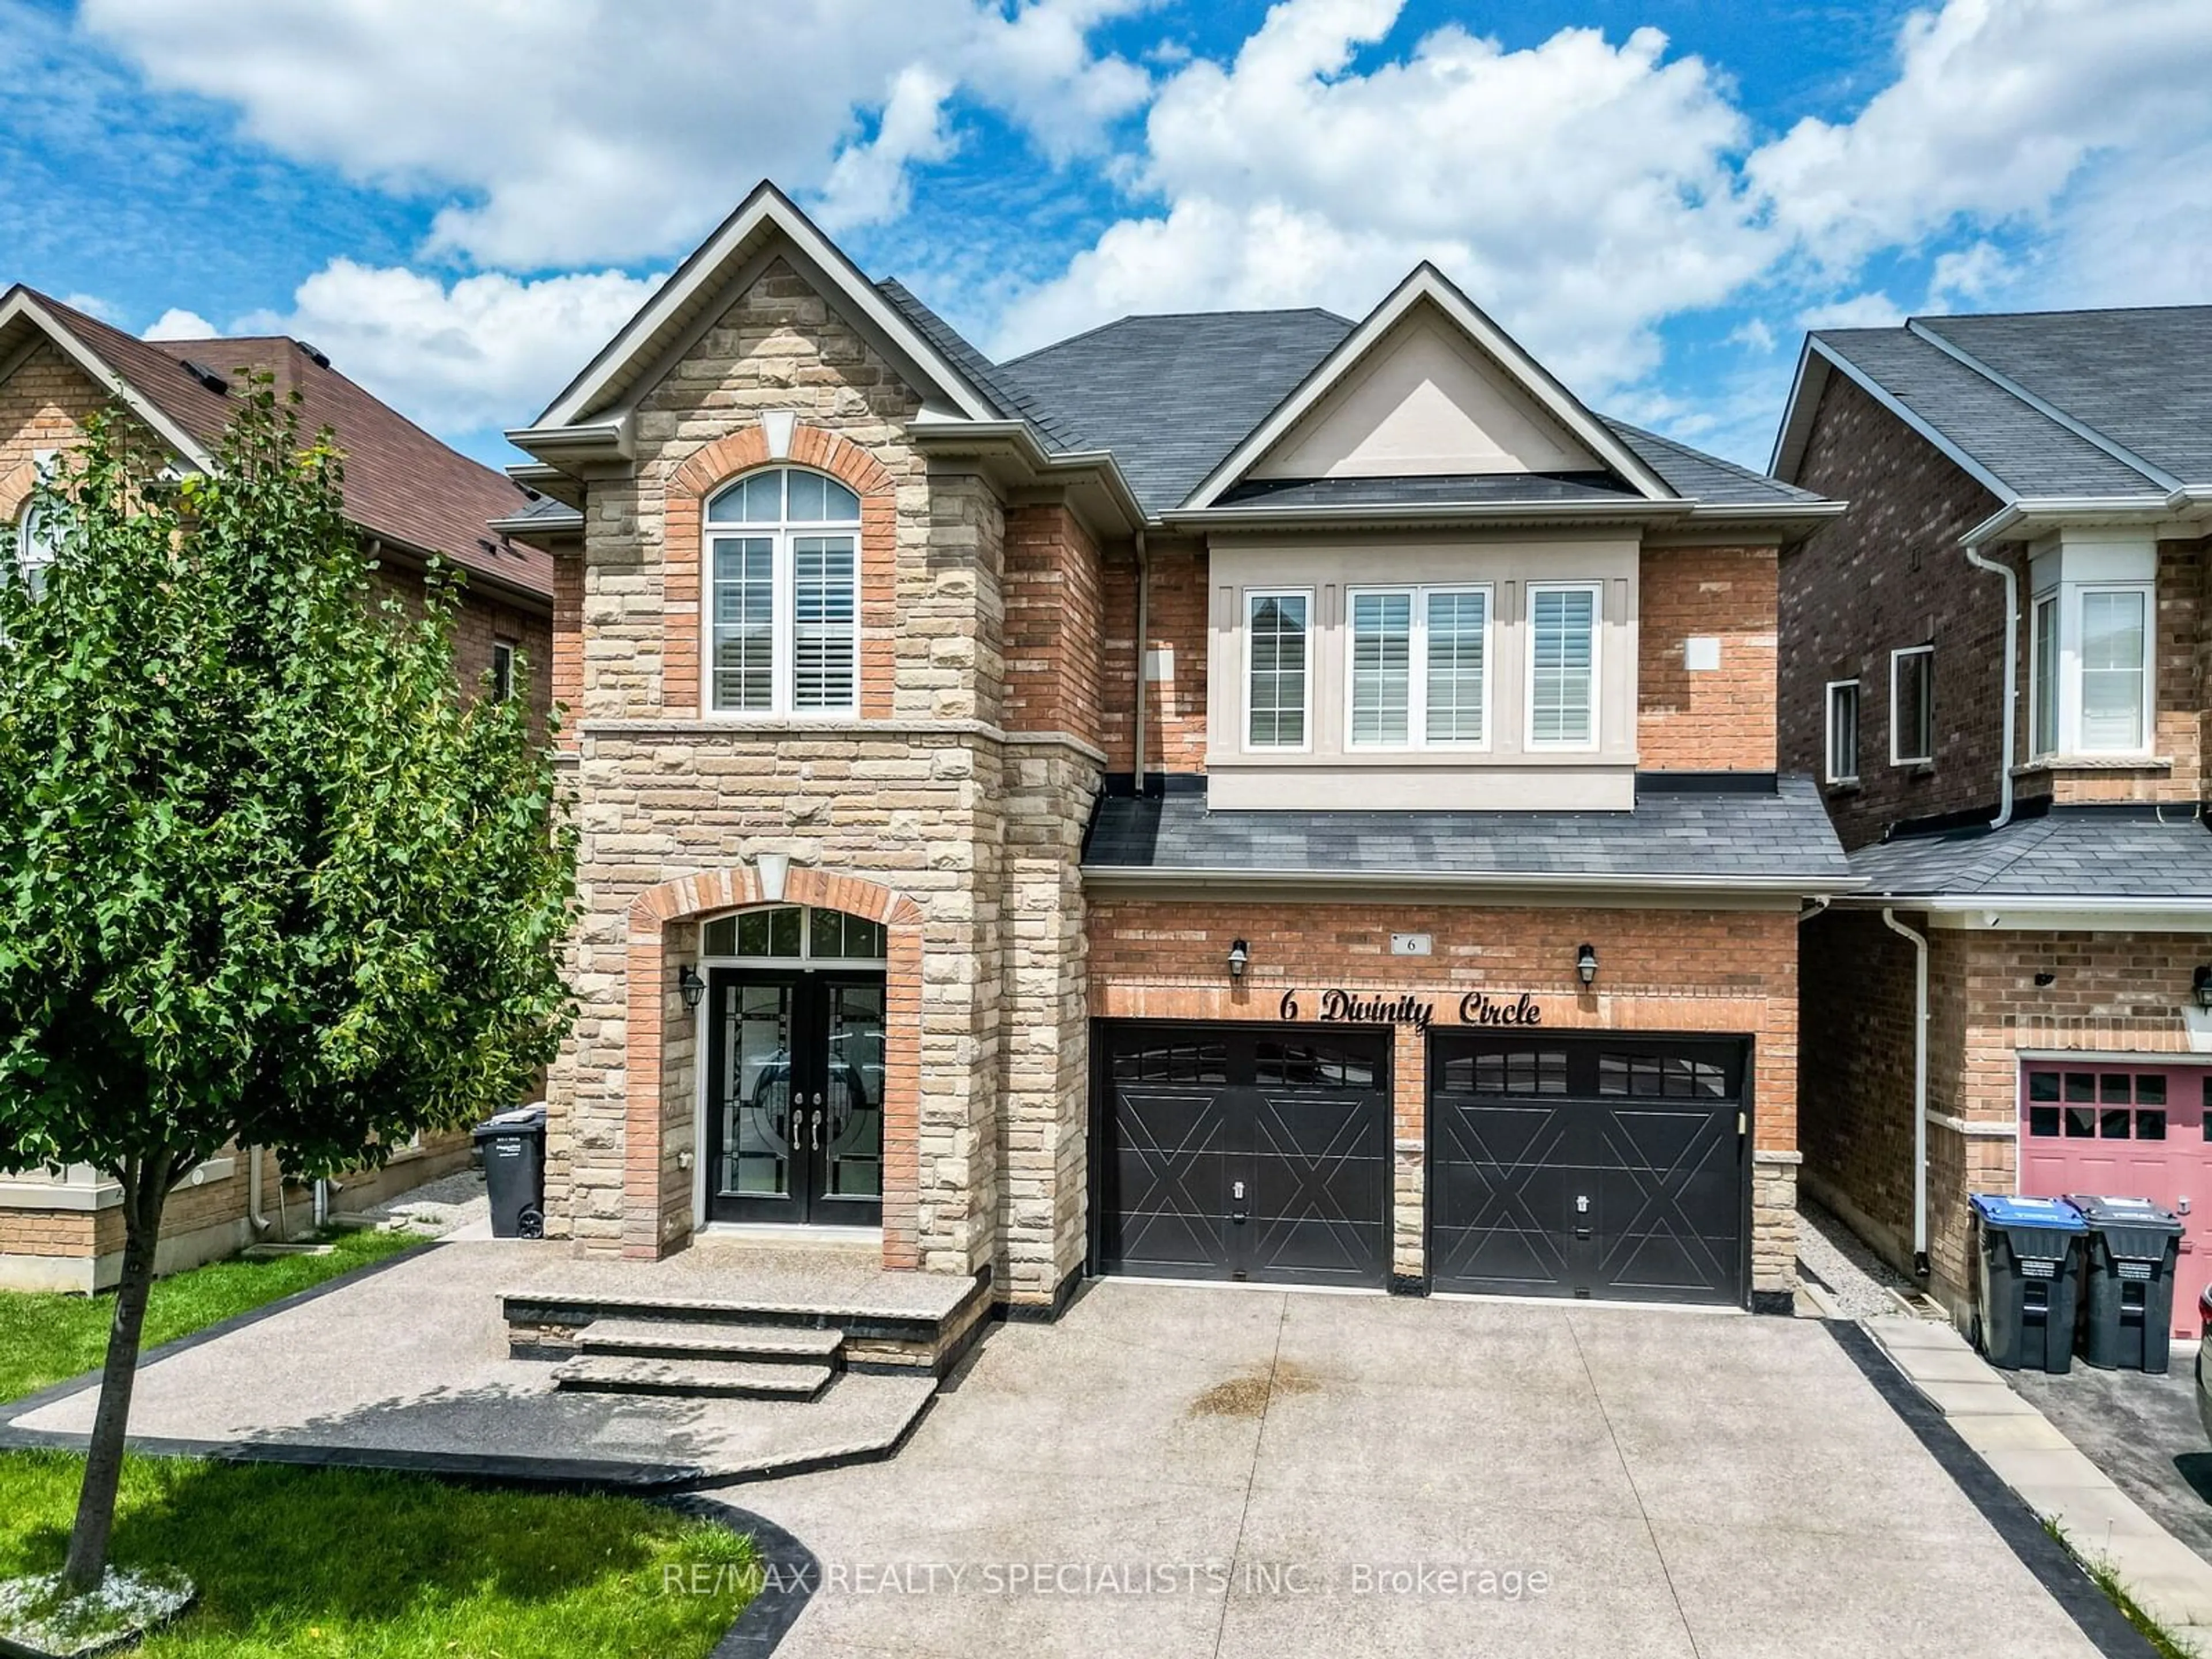 Home with brick exterior material for 6 Divinity Circ, Brampton Ontario L7A 3Y4